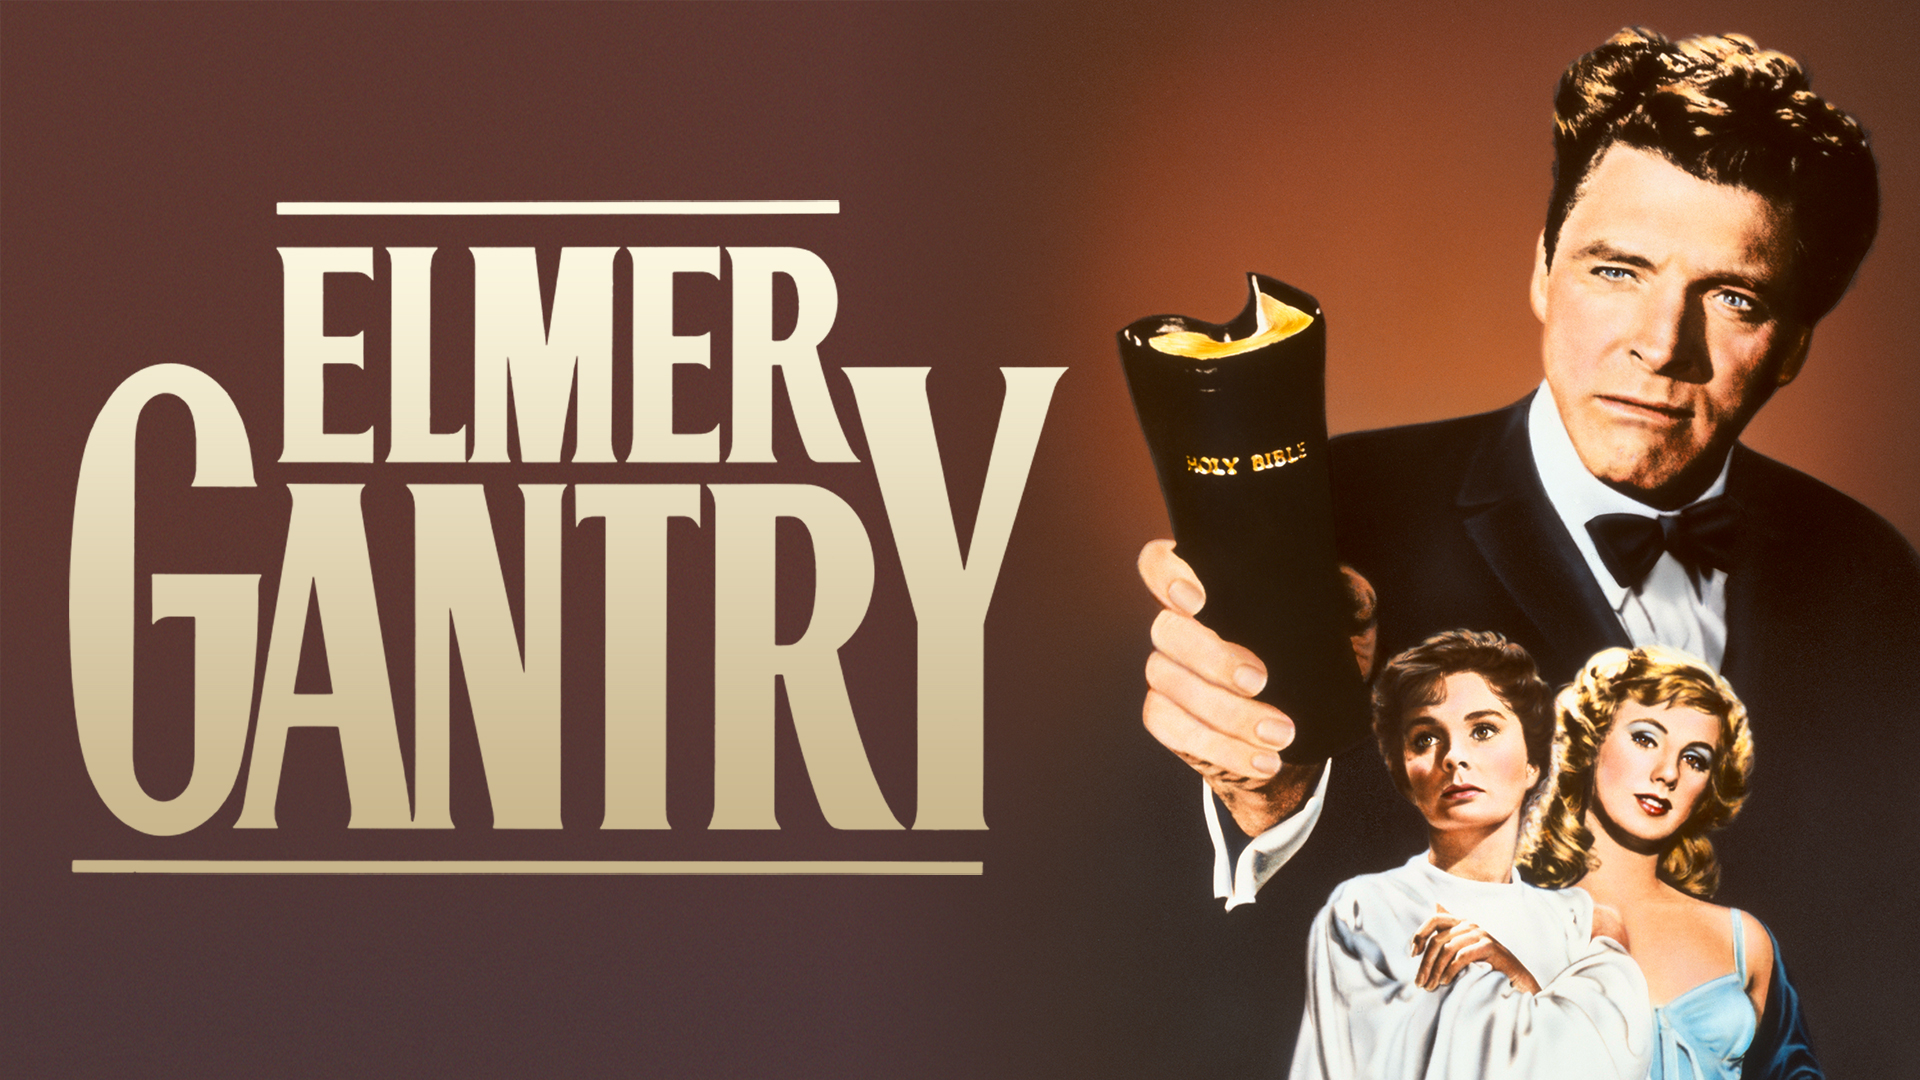 33-facts-about-the-movie-elmer-gantry